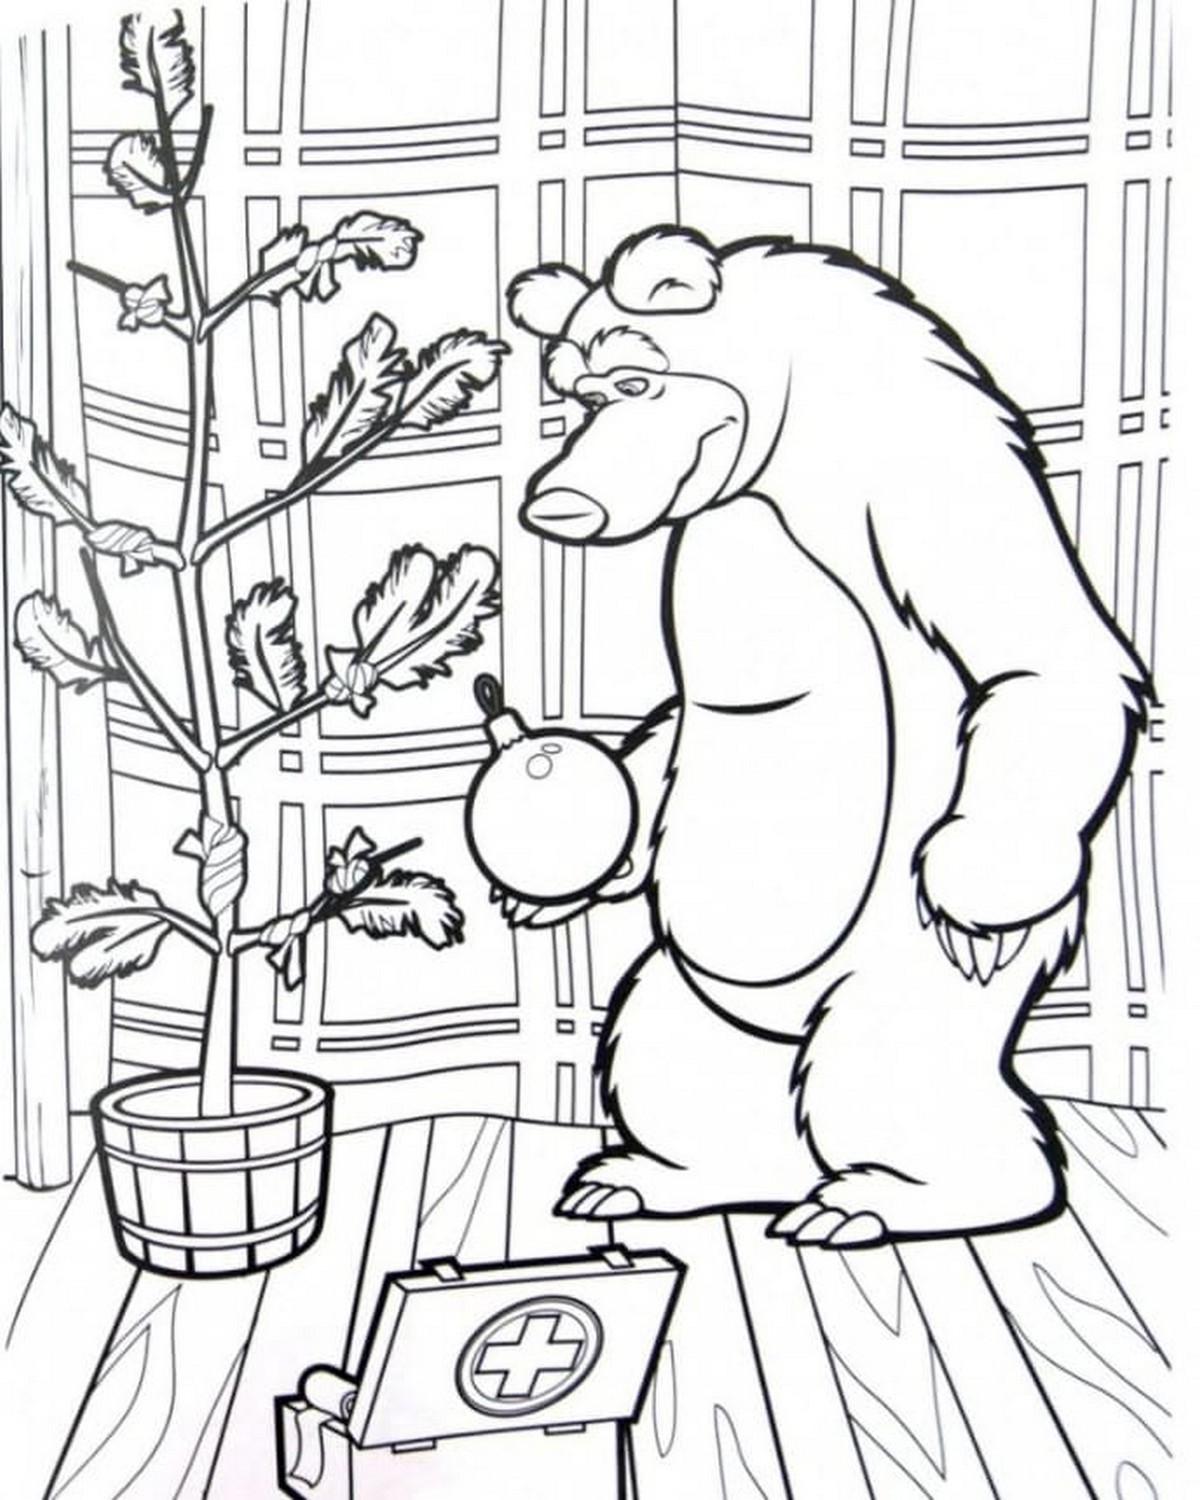 Mascha und der Br 64  coloring page to print and coloring